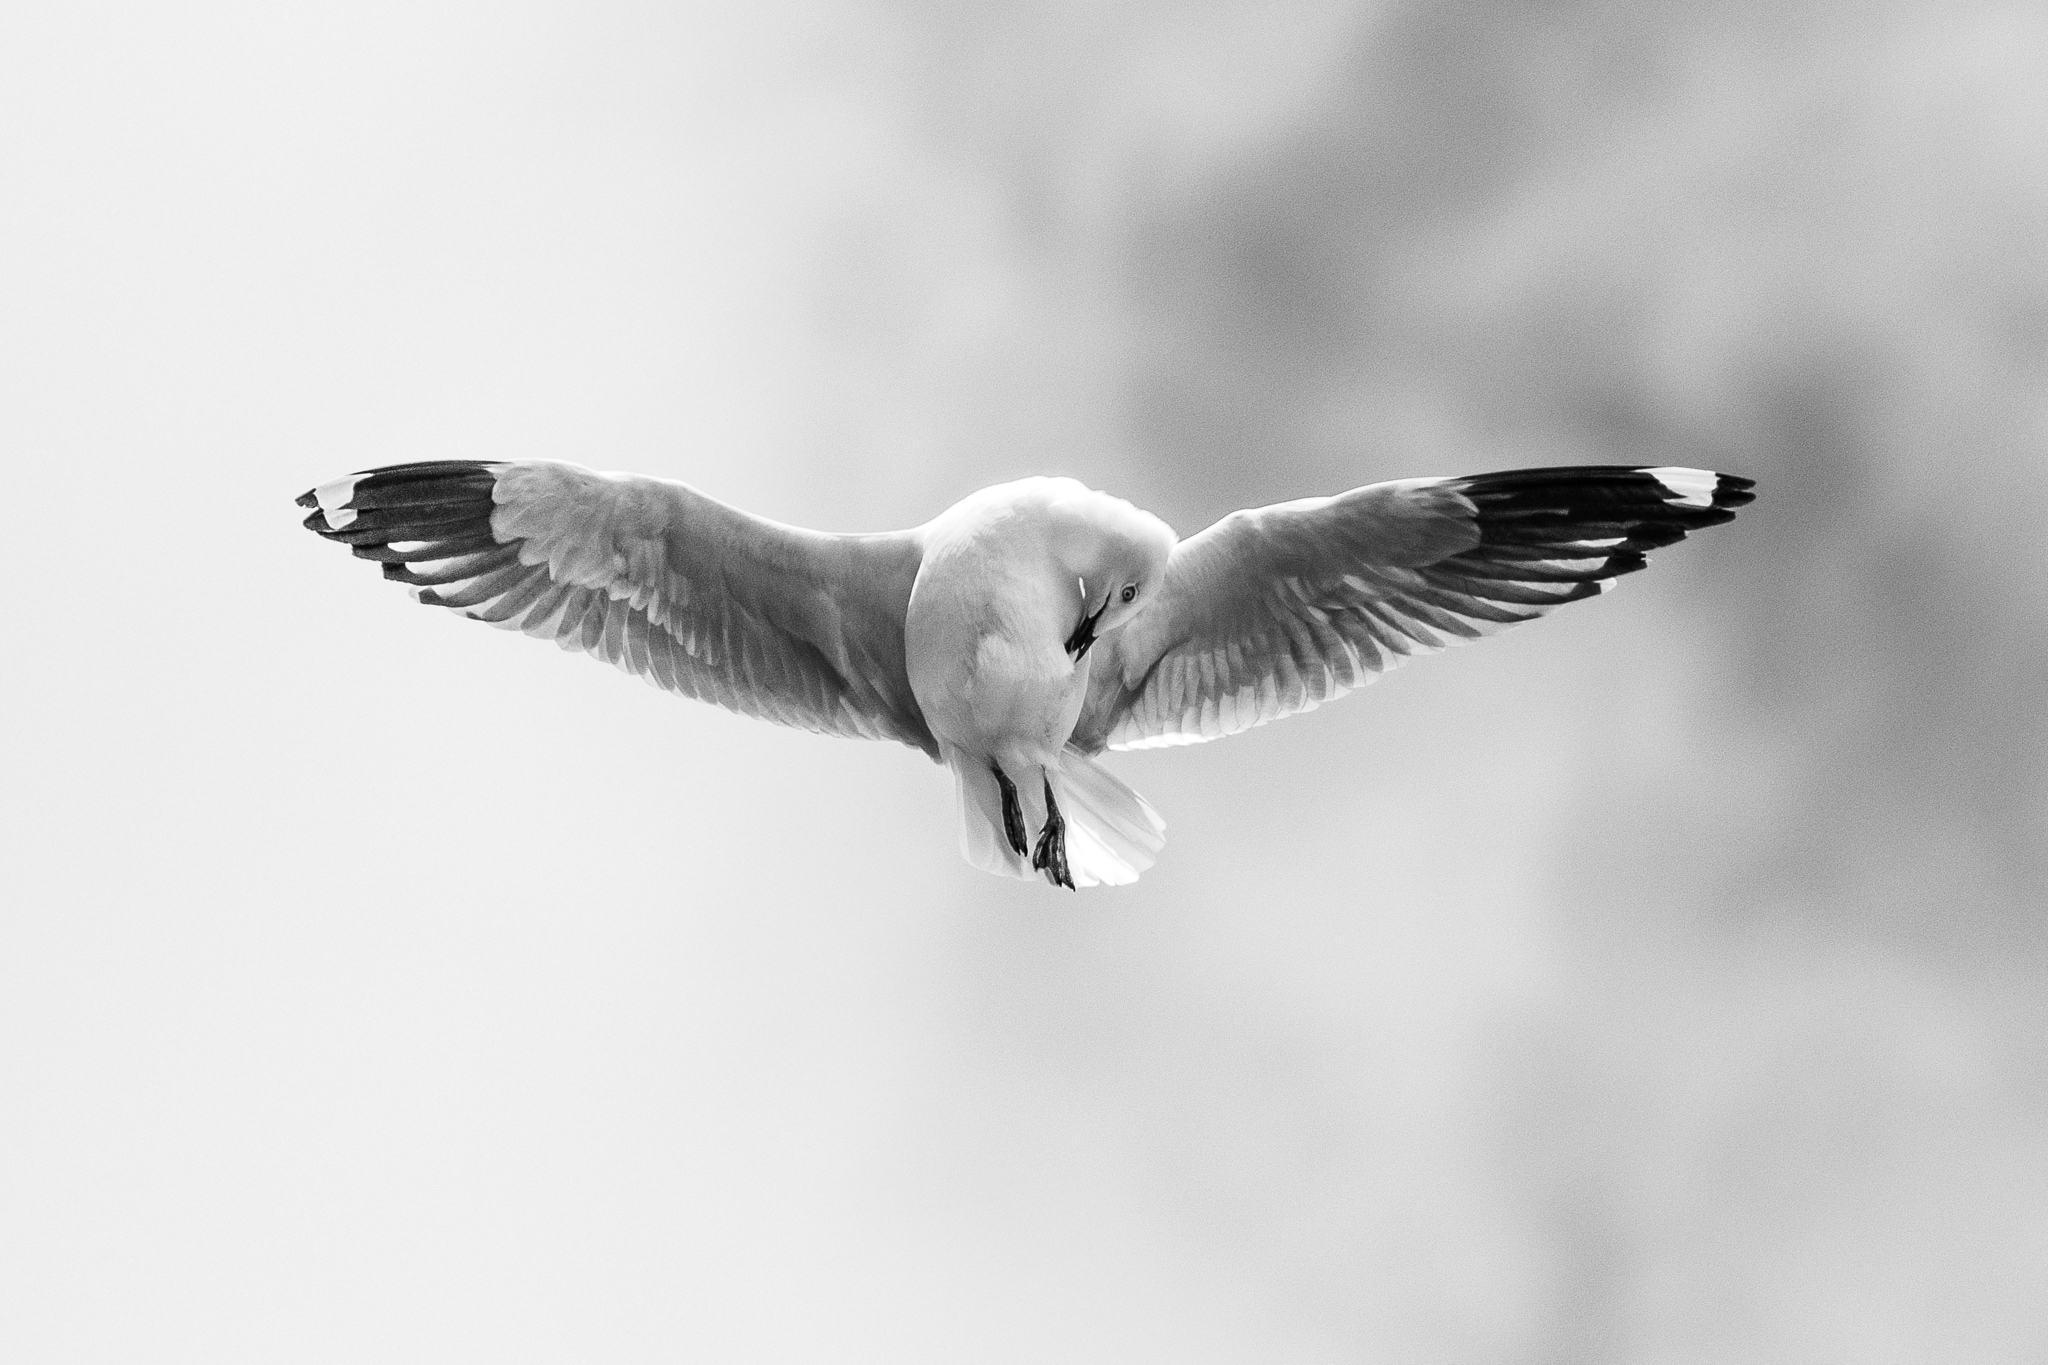 In the centre of the frame, a black-and-white Silver Gull in flight is scratching itself, its head tucked under its wing.